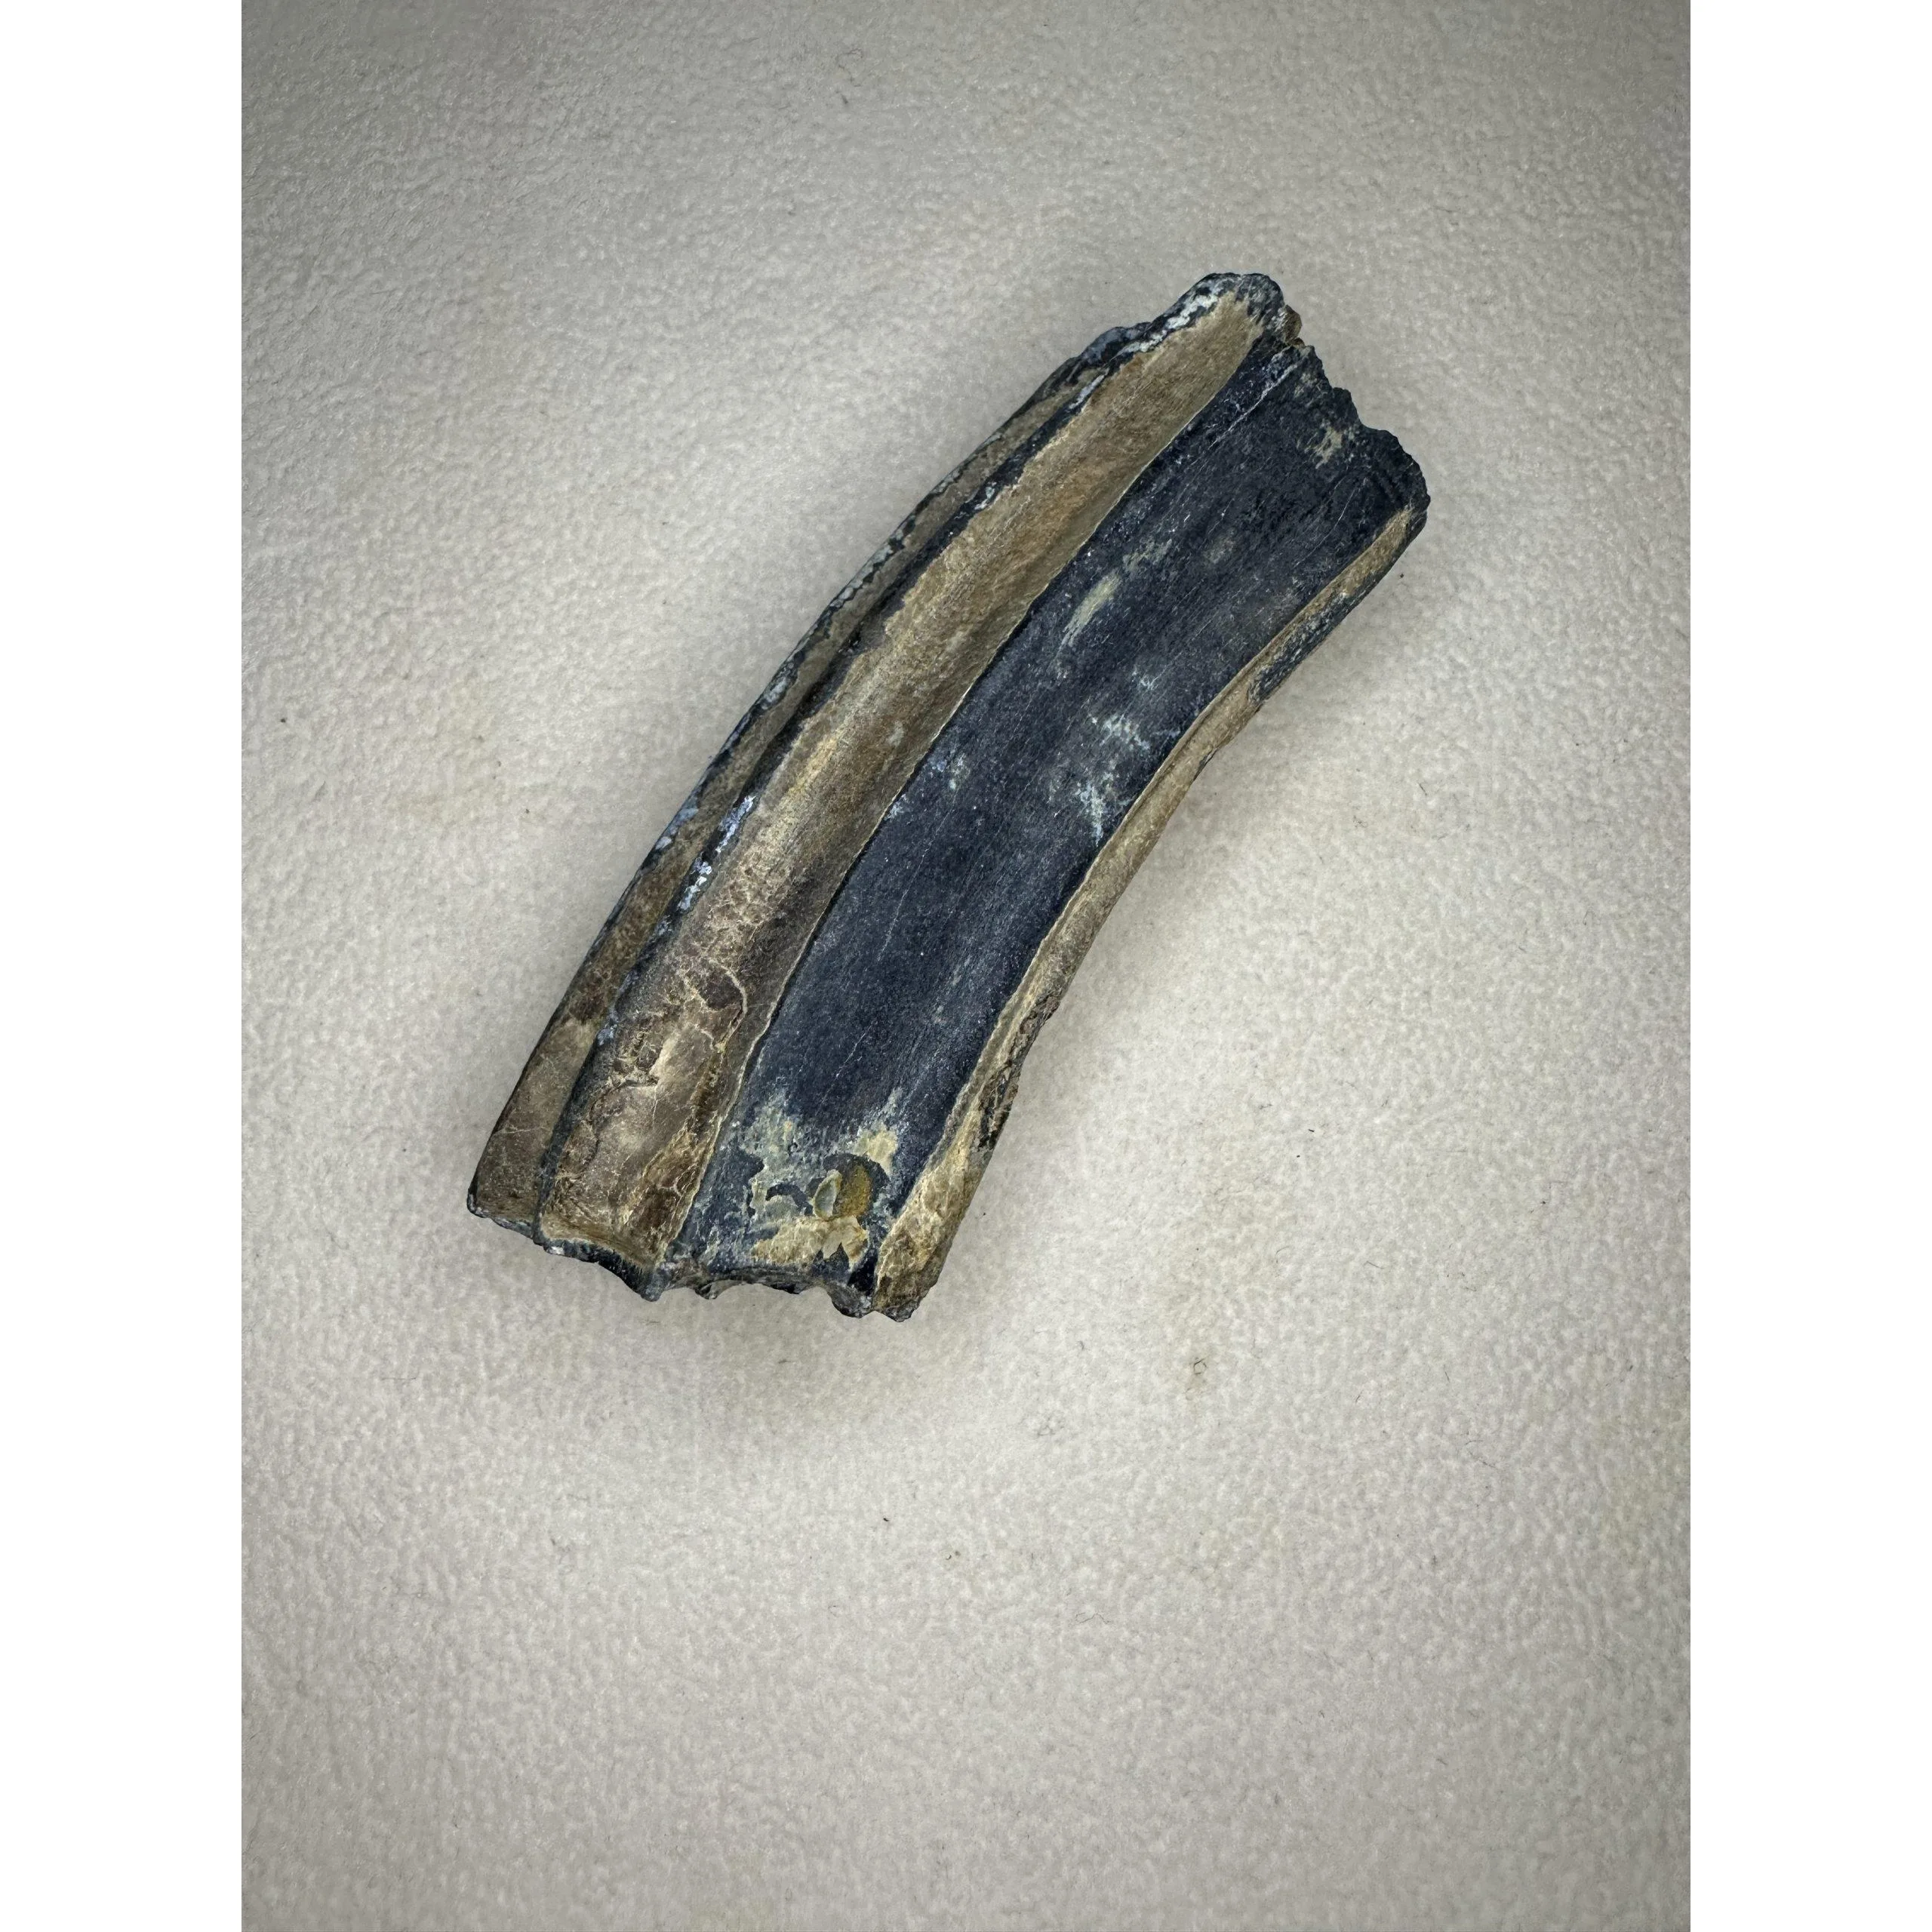 Fossil Horse Tooth – Florida, near perfect ice age molar Prehistoric Online